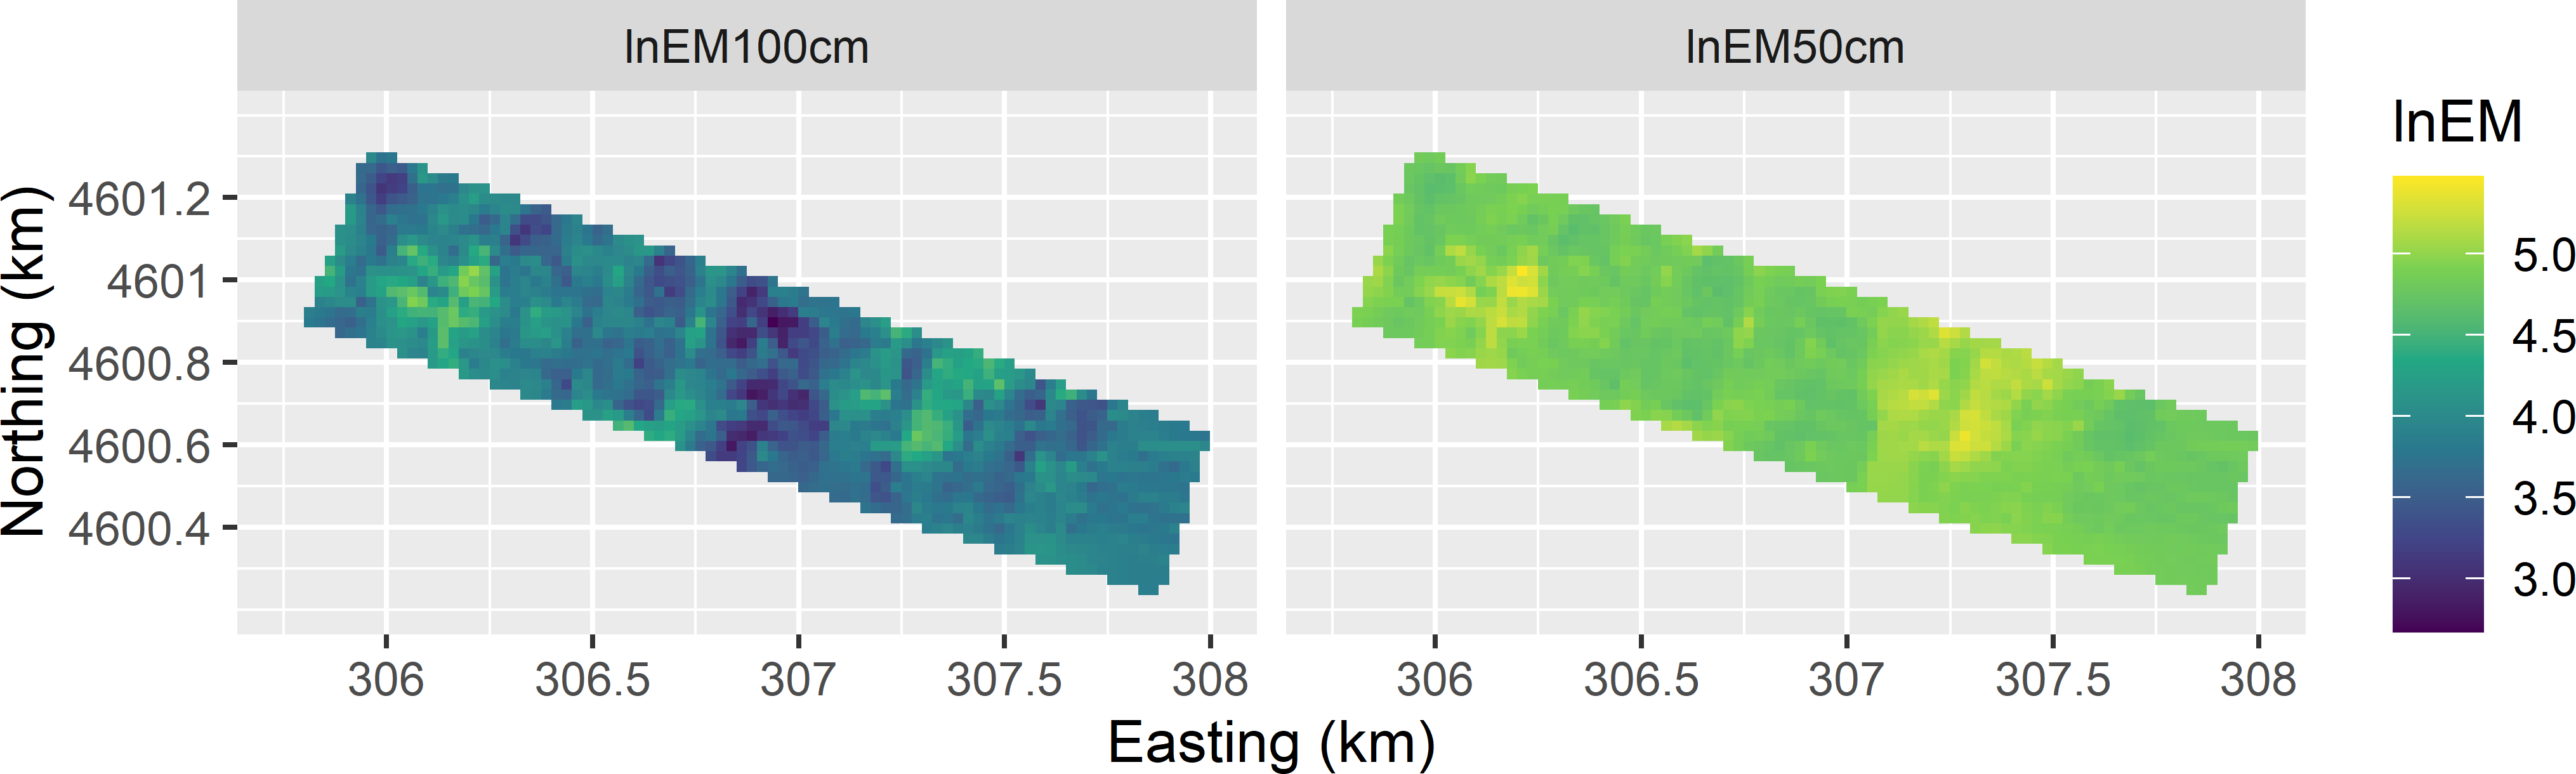 Interpolated surfaces of natural log of EM measurements on the Cotton Research Farm, used as covariates in spatial response surface sampling.